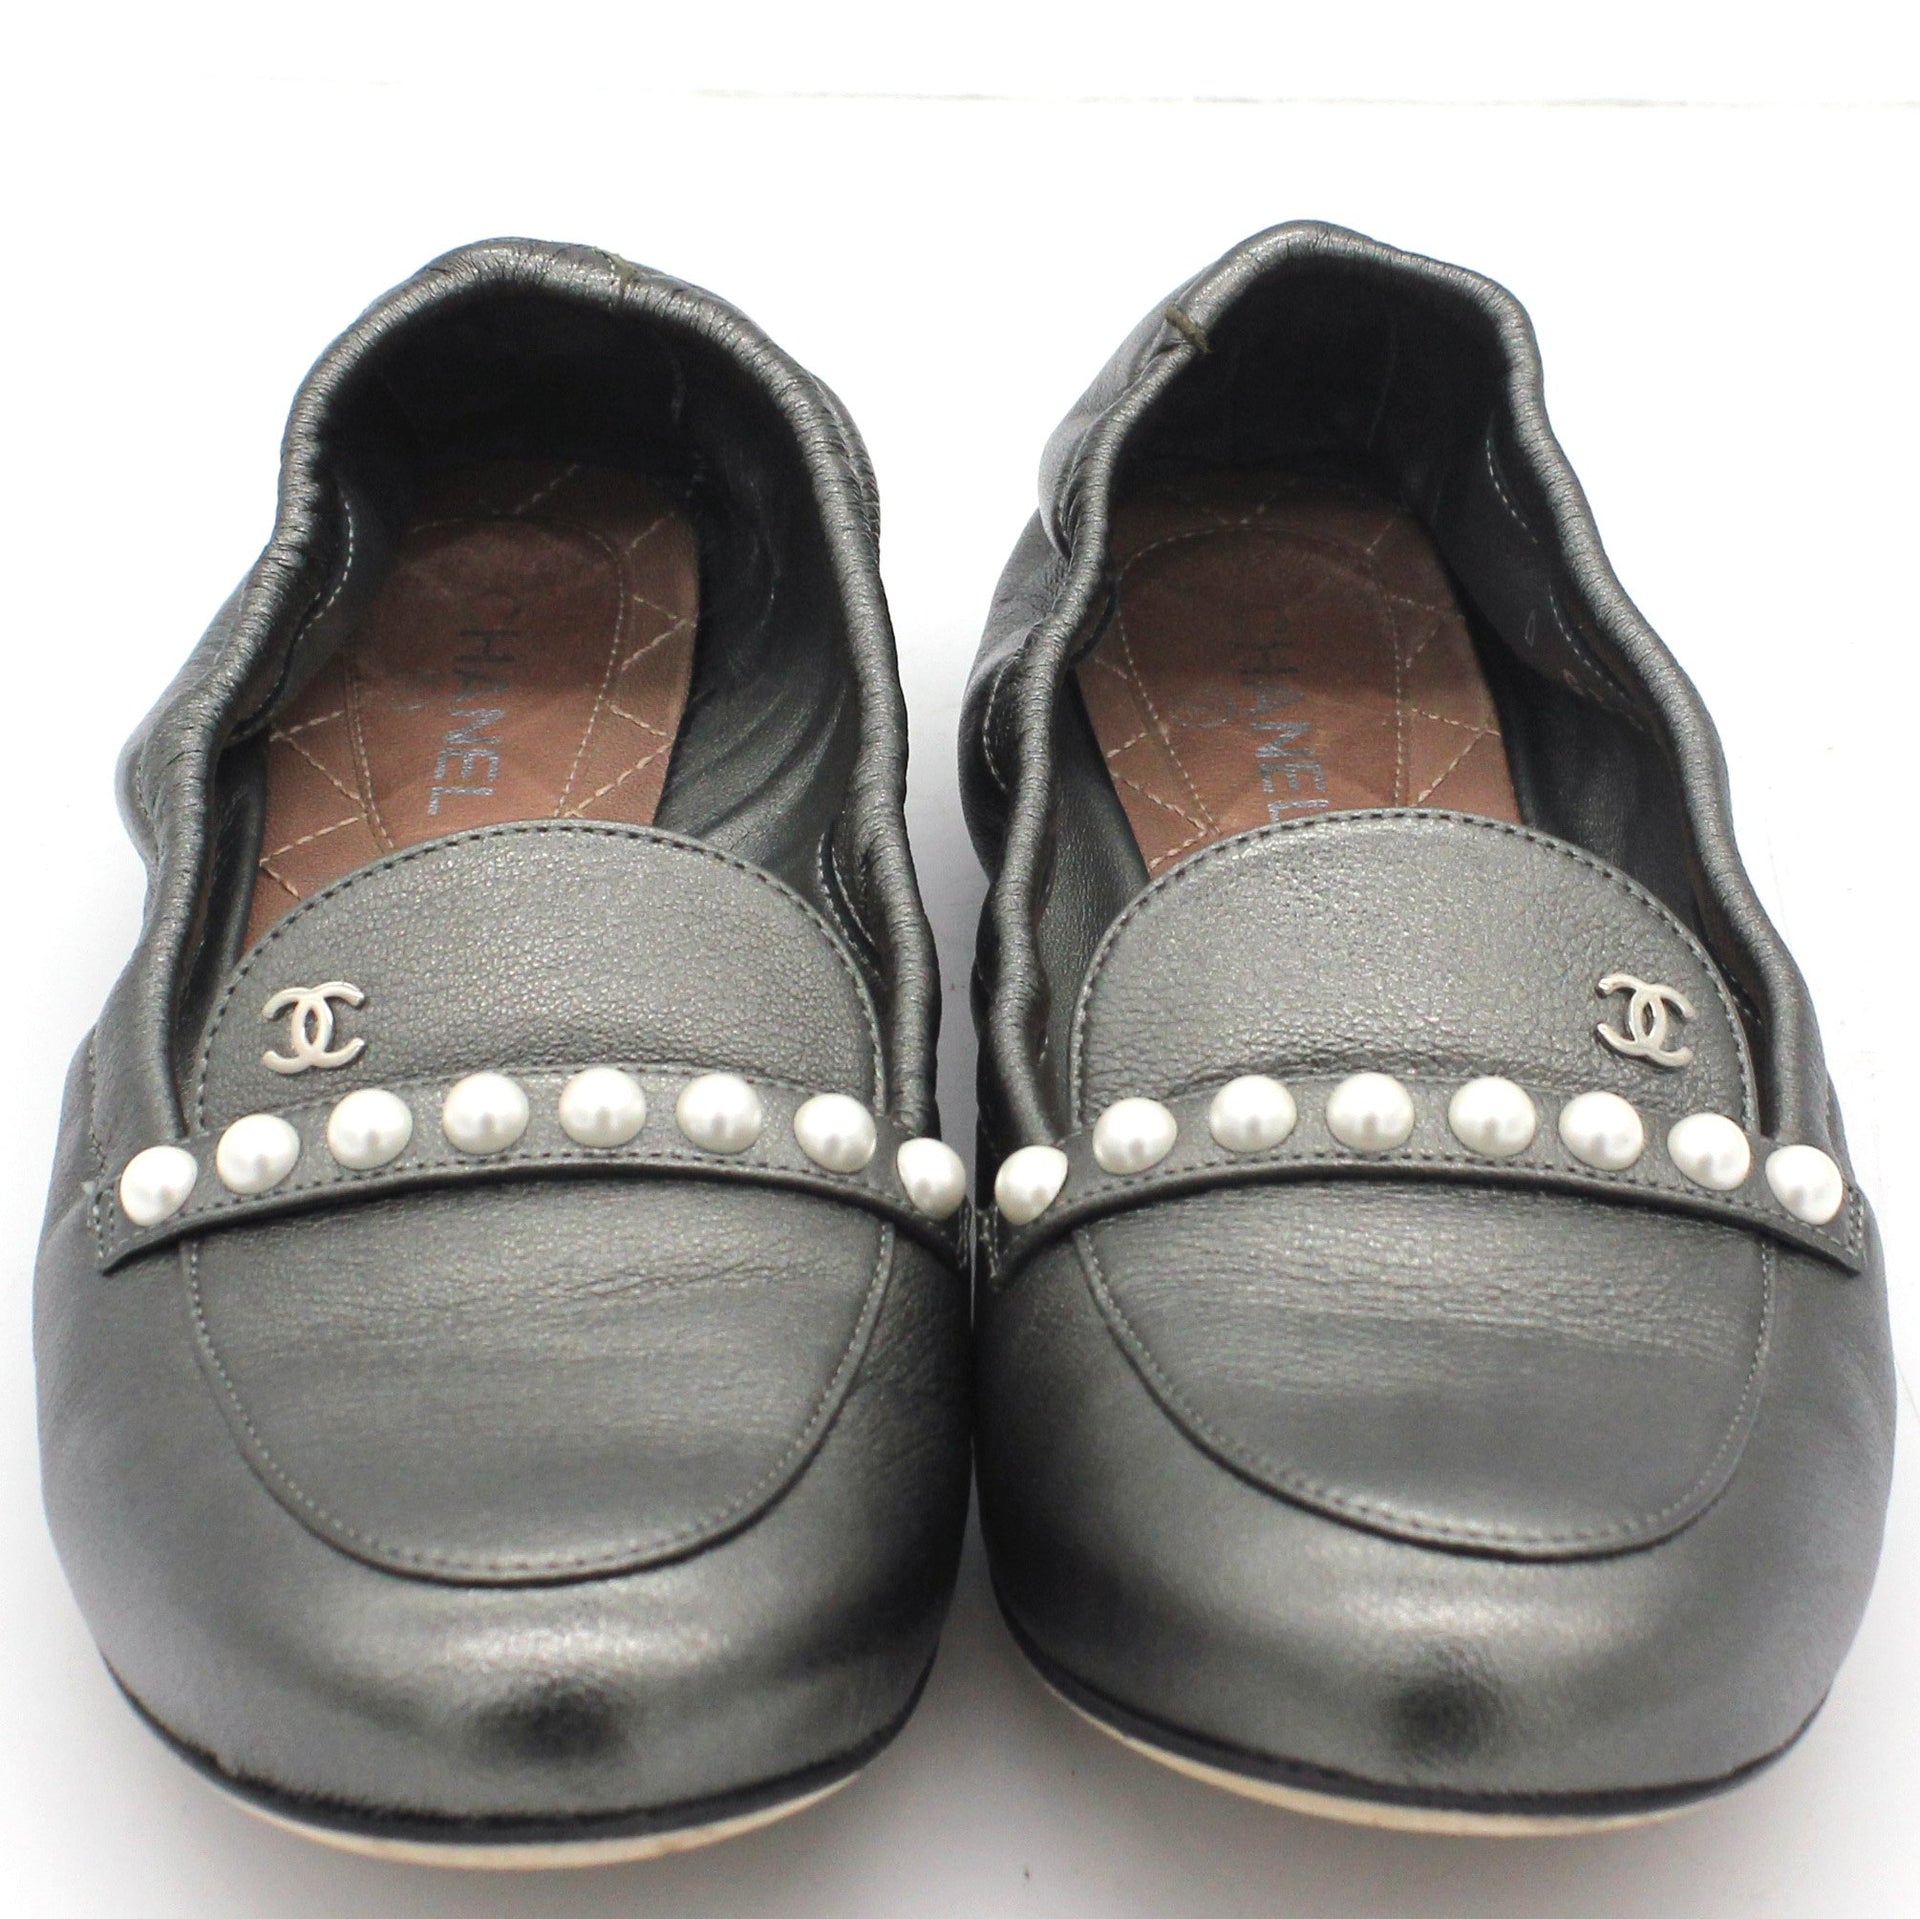 Silver Pump with pearl embellished 38